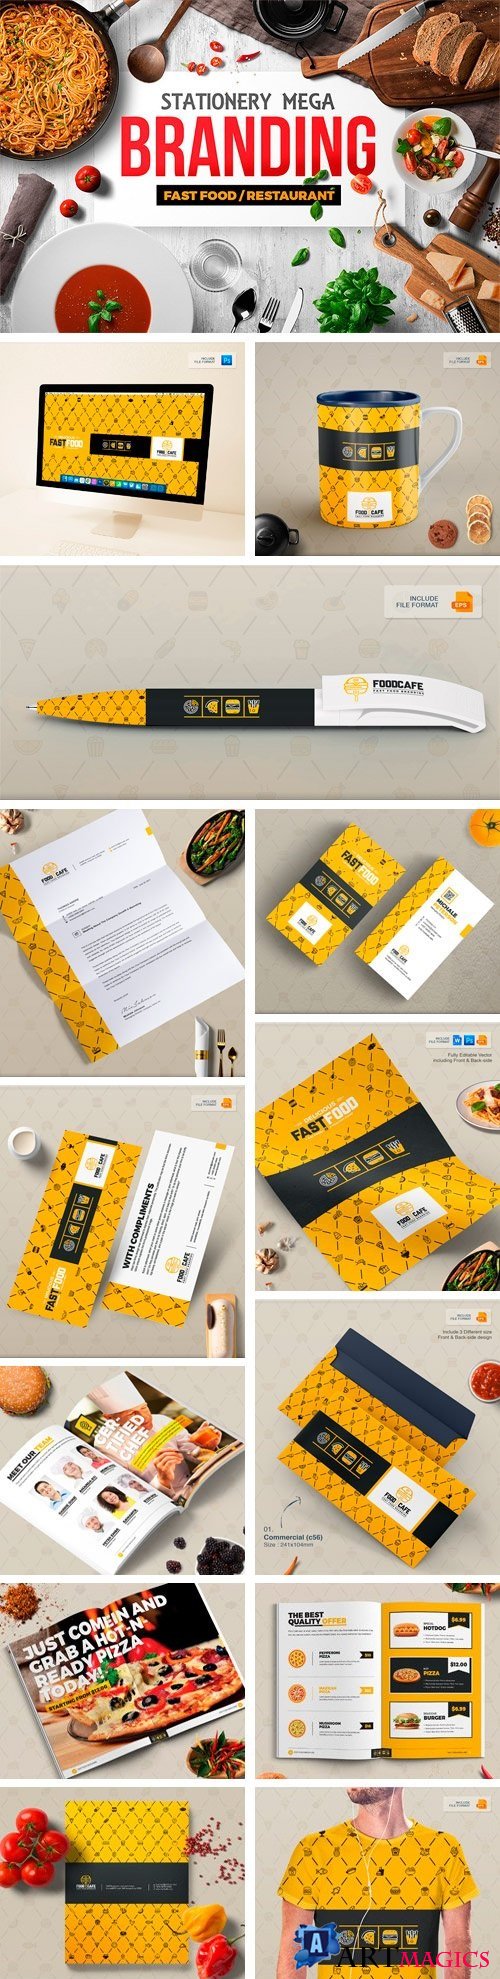 Branding Identity for Fast Food - 2123409 - 20193465